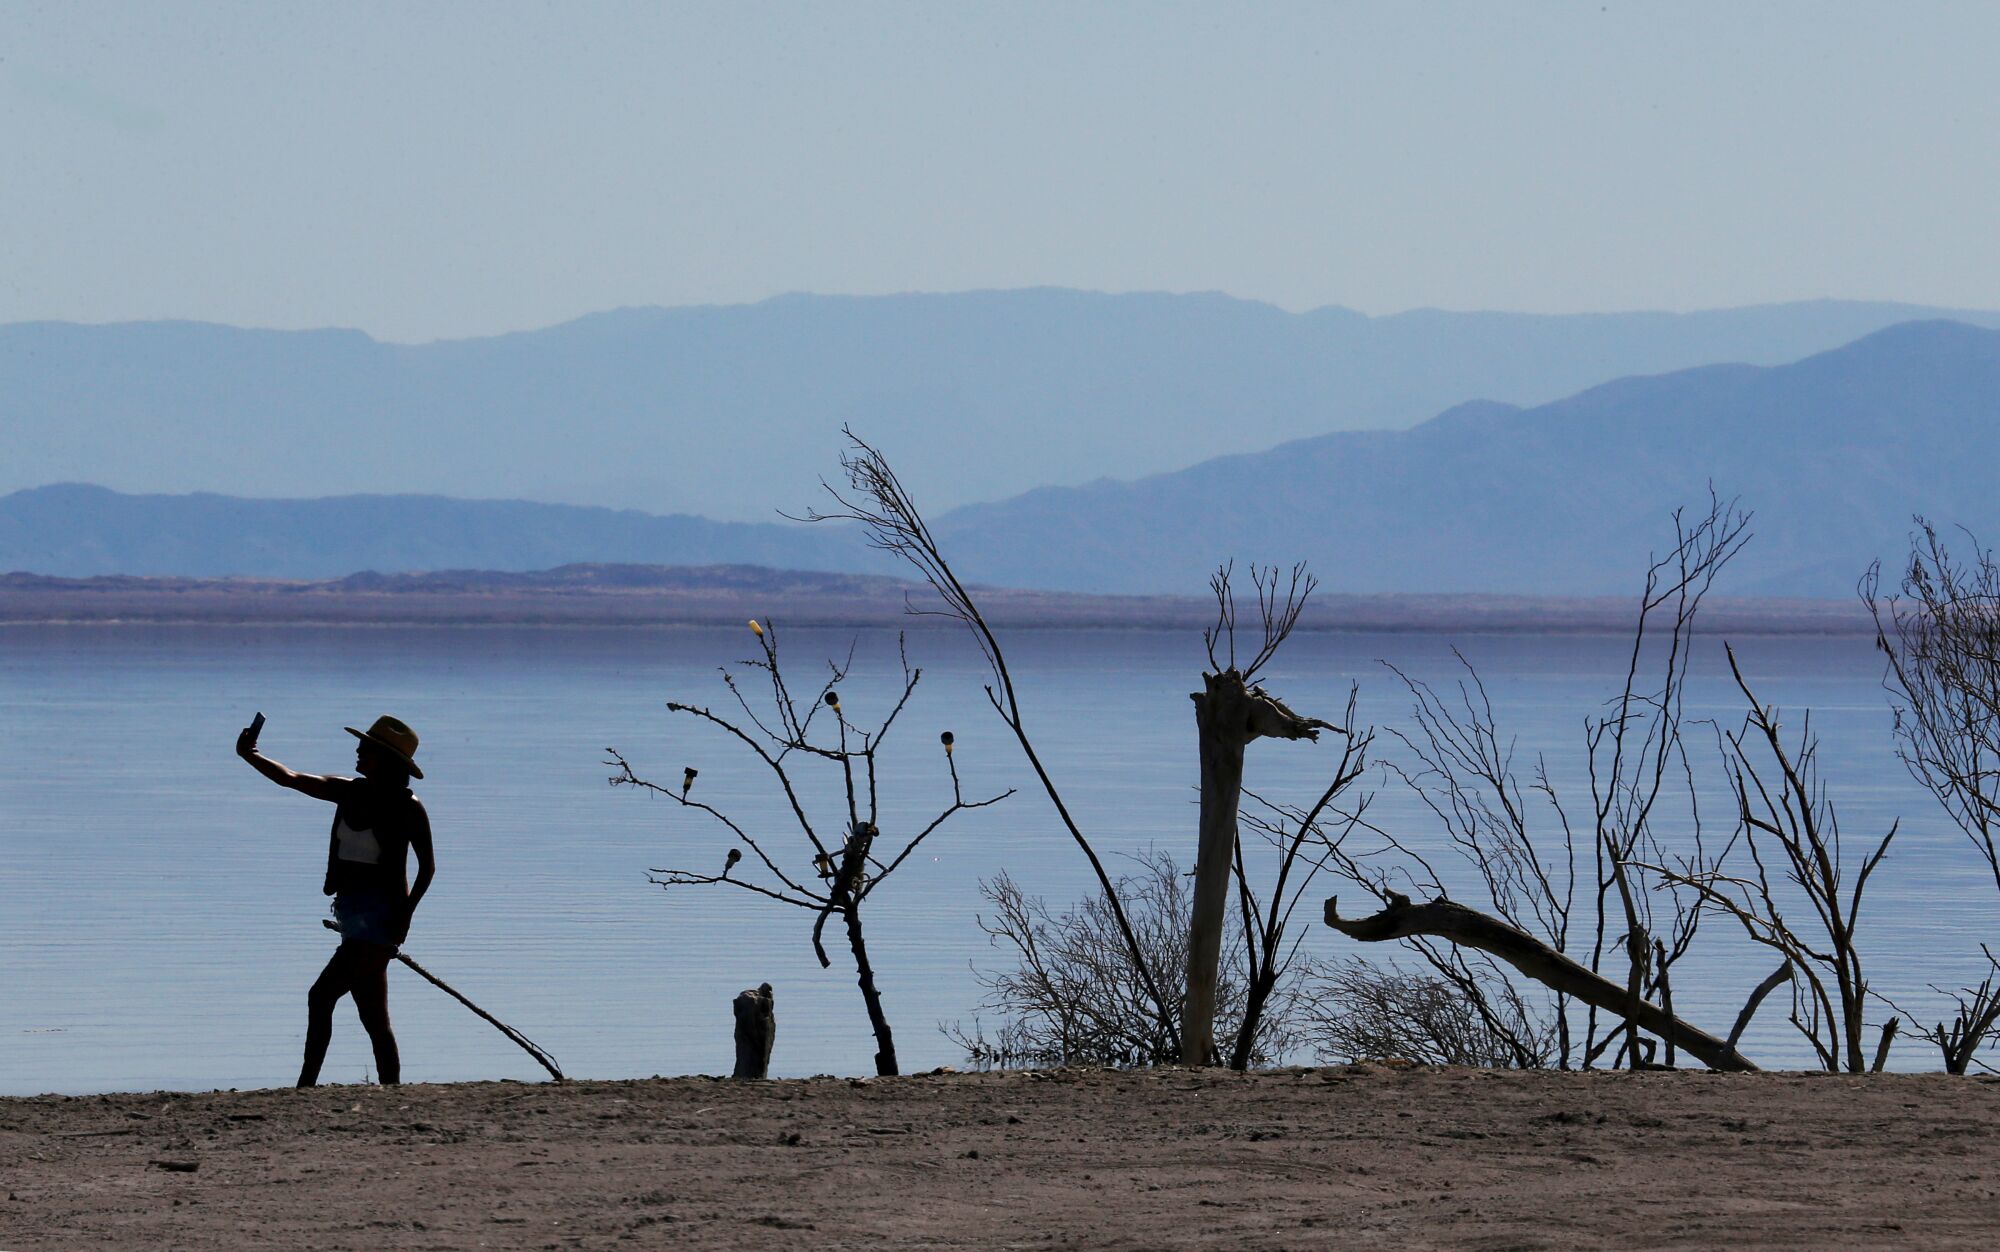 A visitor takes a selfie beside public art in Bombay Beach, a tiny community on the Salton Sea.